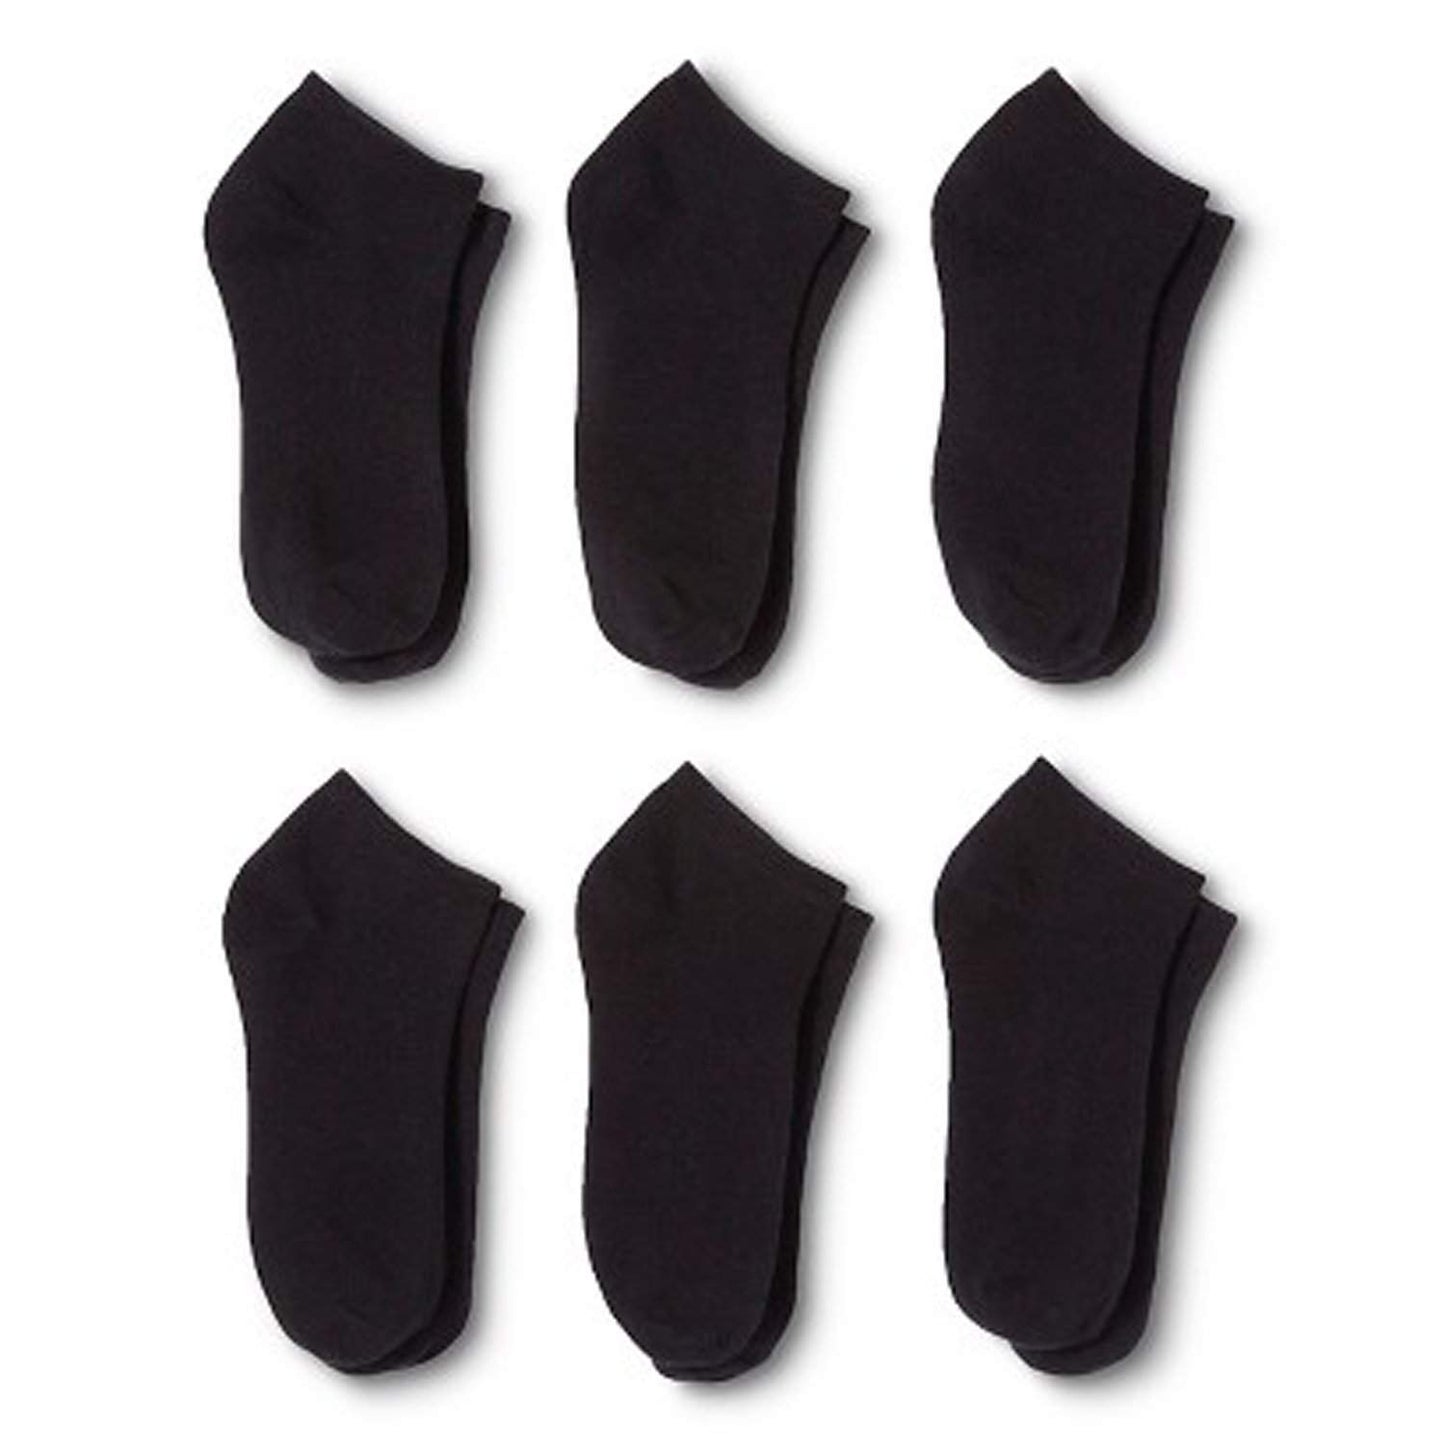 Cotton Ankle Socks Low Cut, No Show Men and Women Socks - 36 Pack